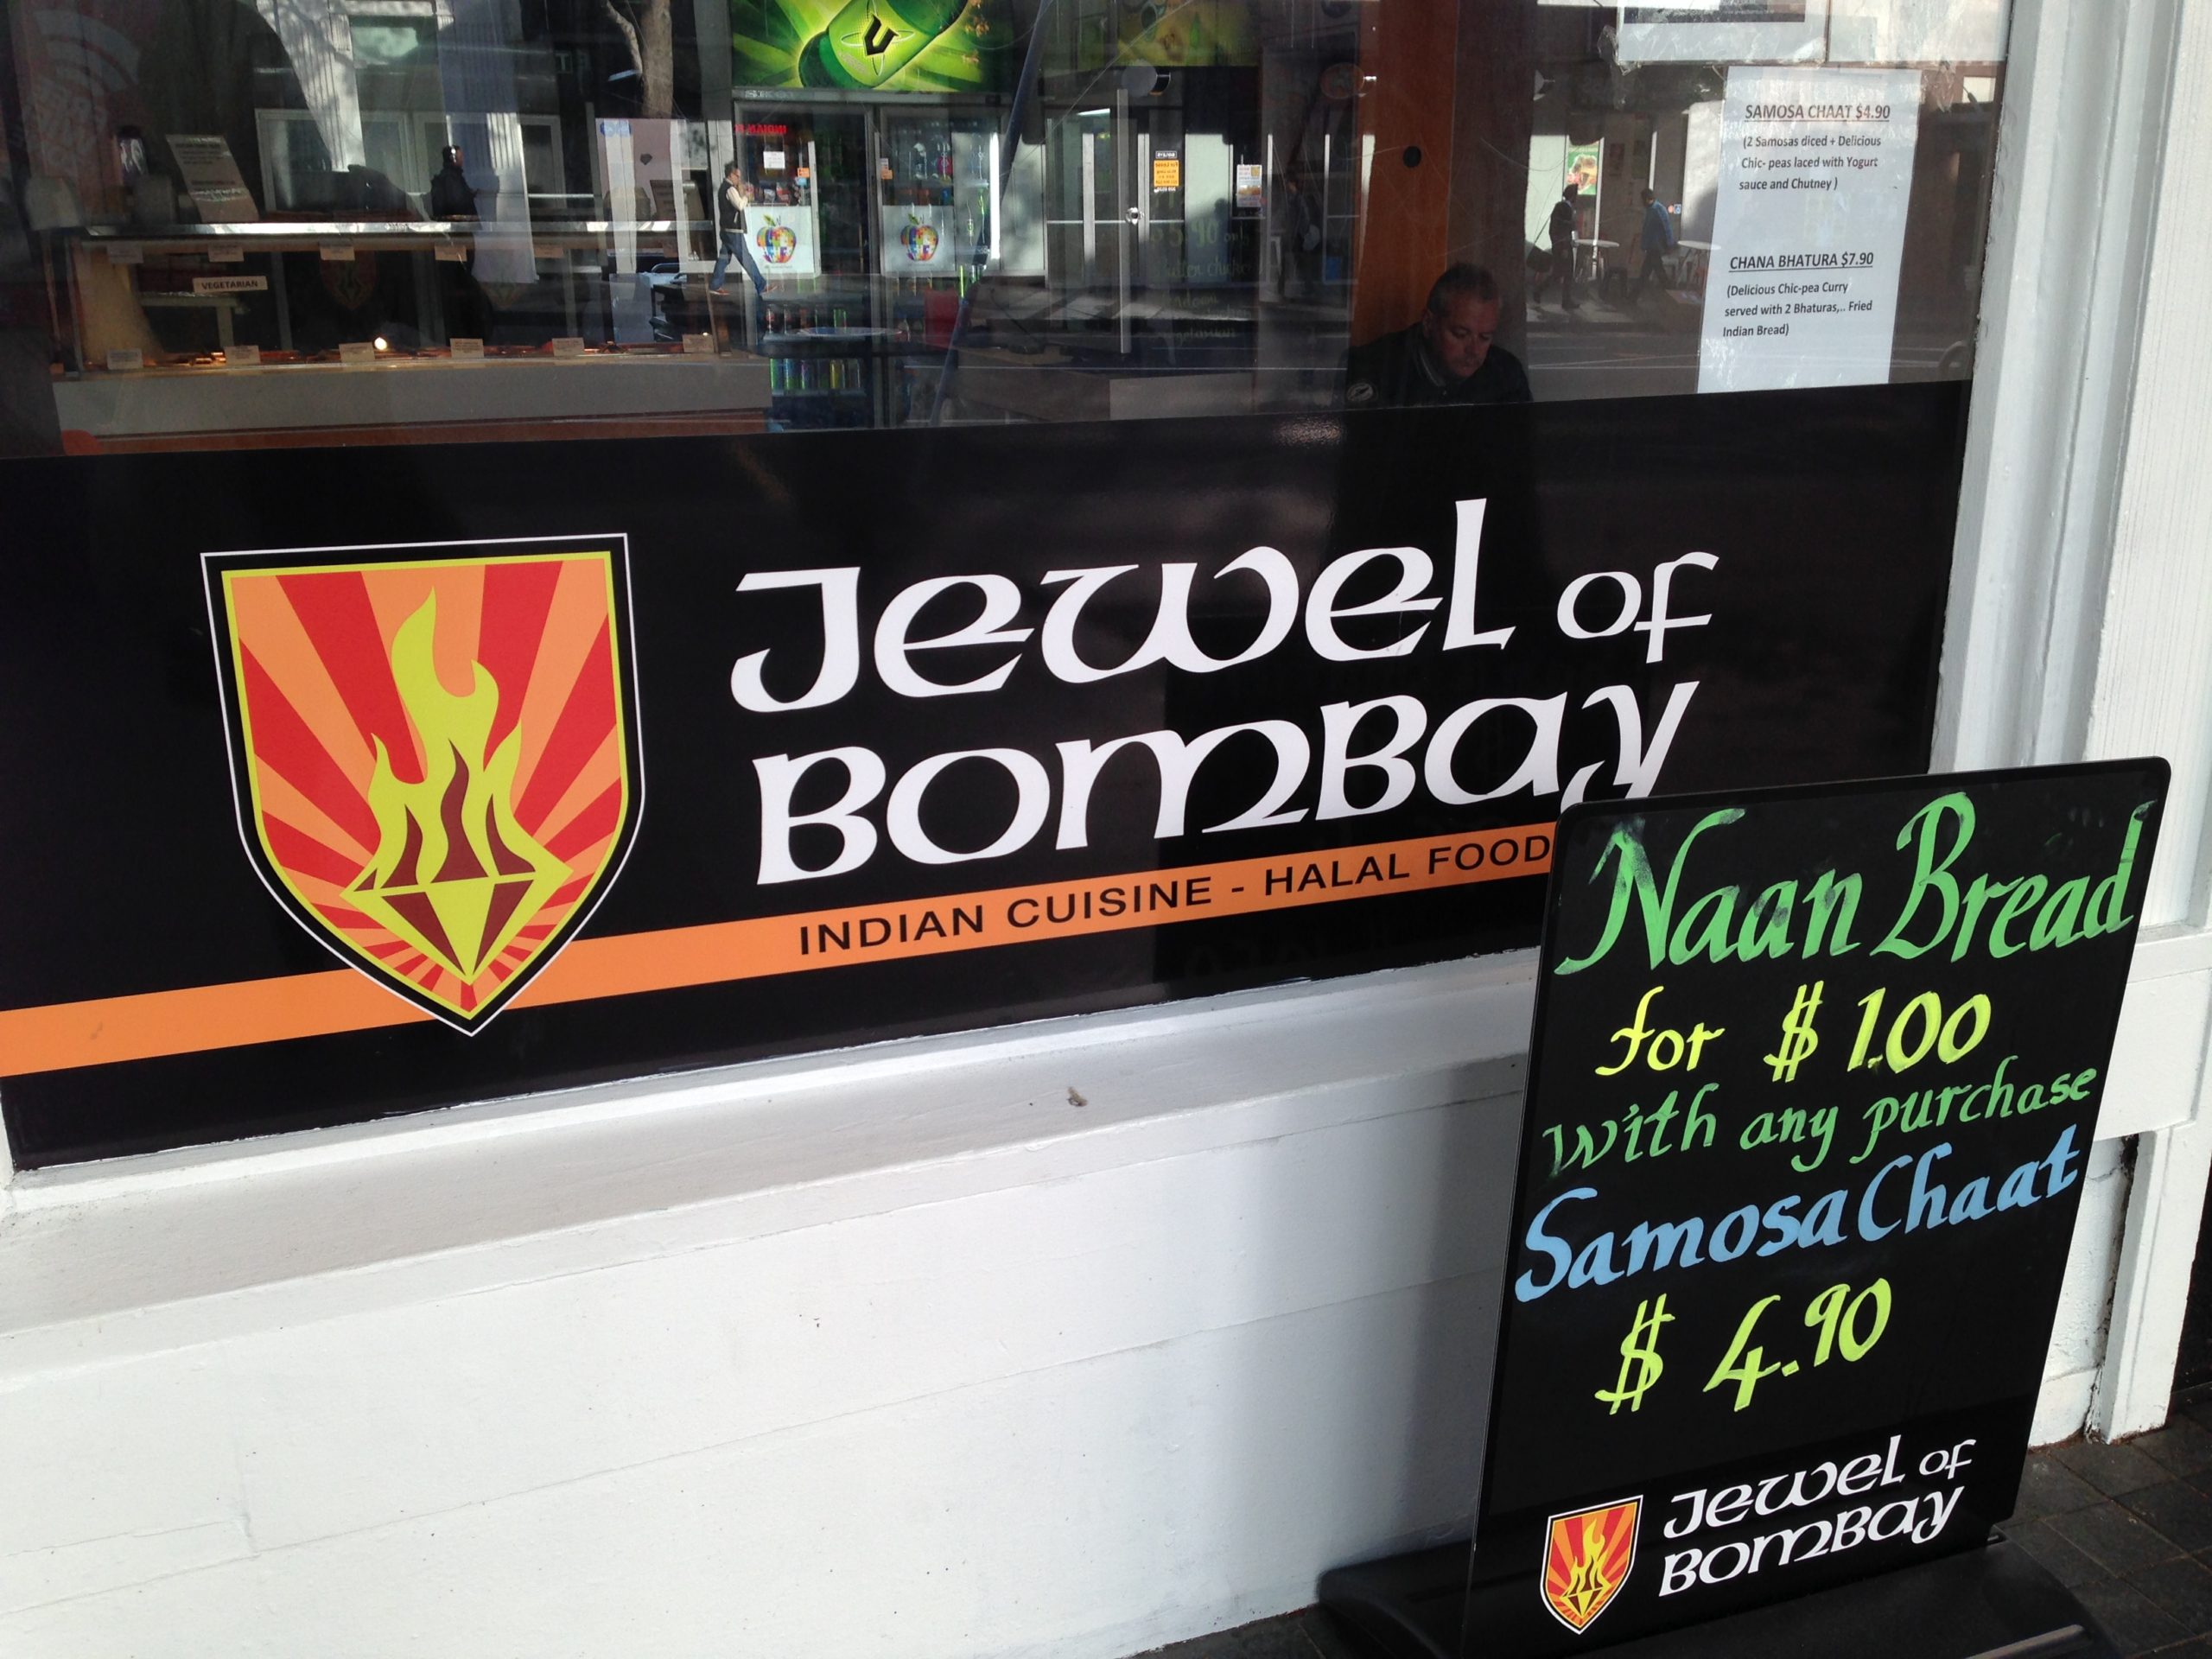 The Jewel of Bombay in Auckland